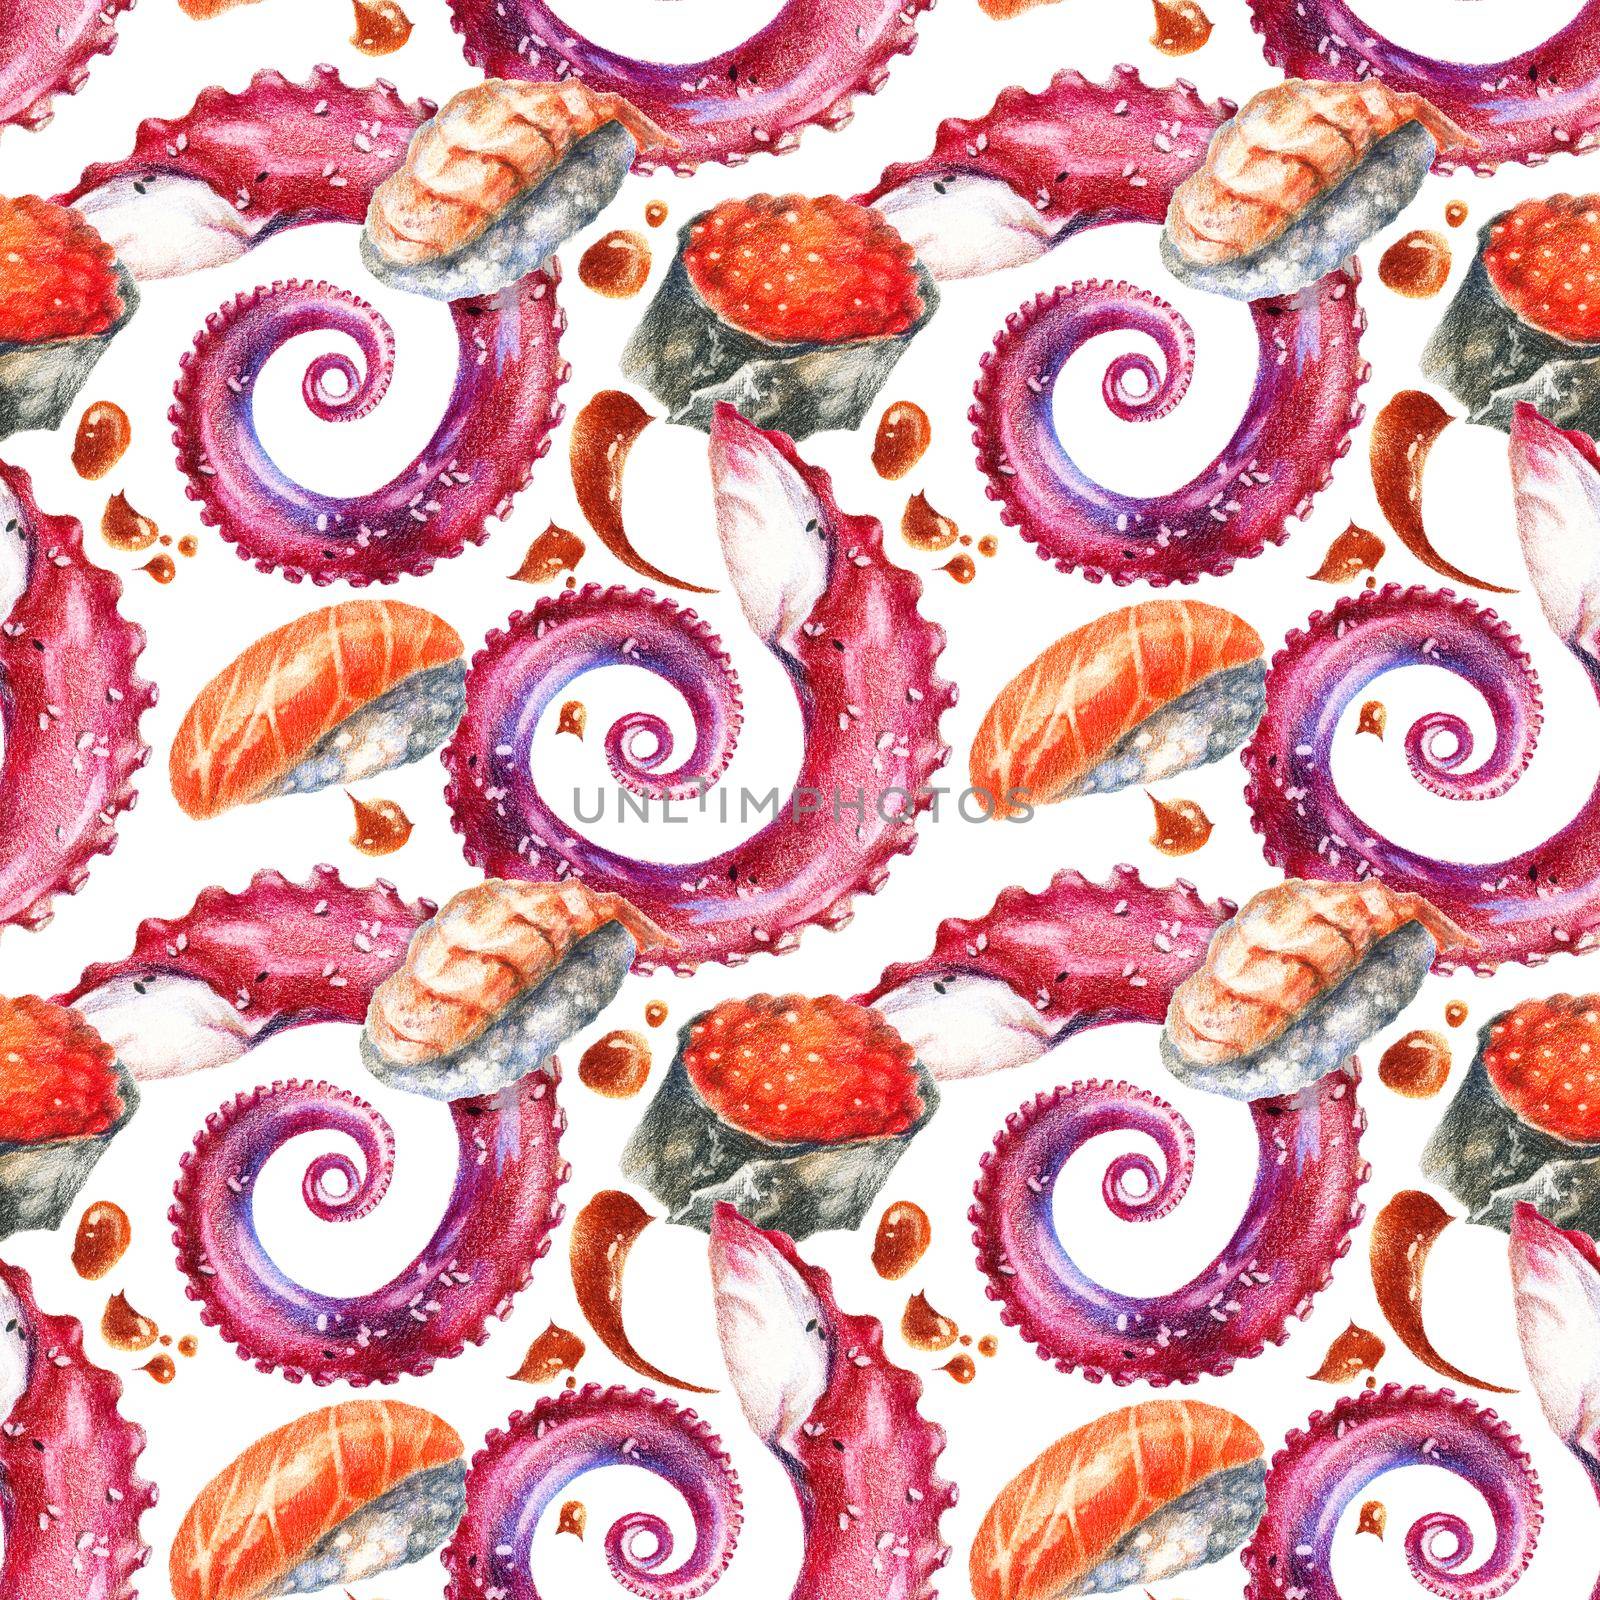 Color pencils realistic illustration of asian seafood - sushi, roll with caviar, octopus tentacle and soy sauce drops. Seamless pattern. Hand-drawn objects on white background.